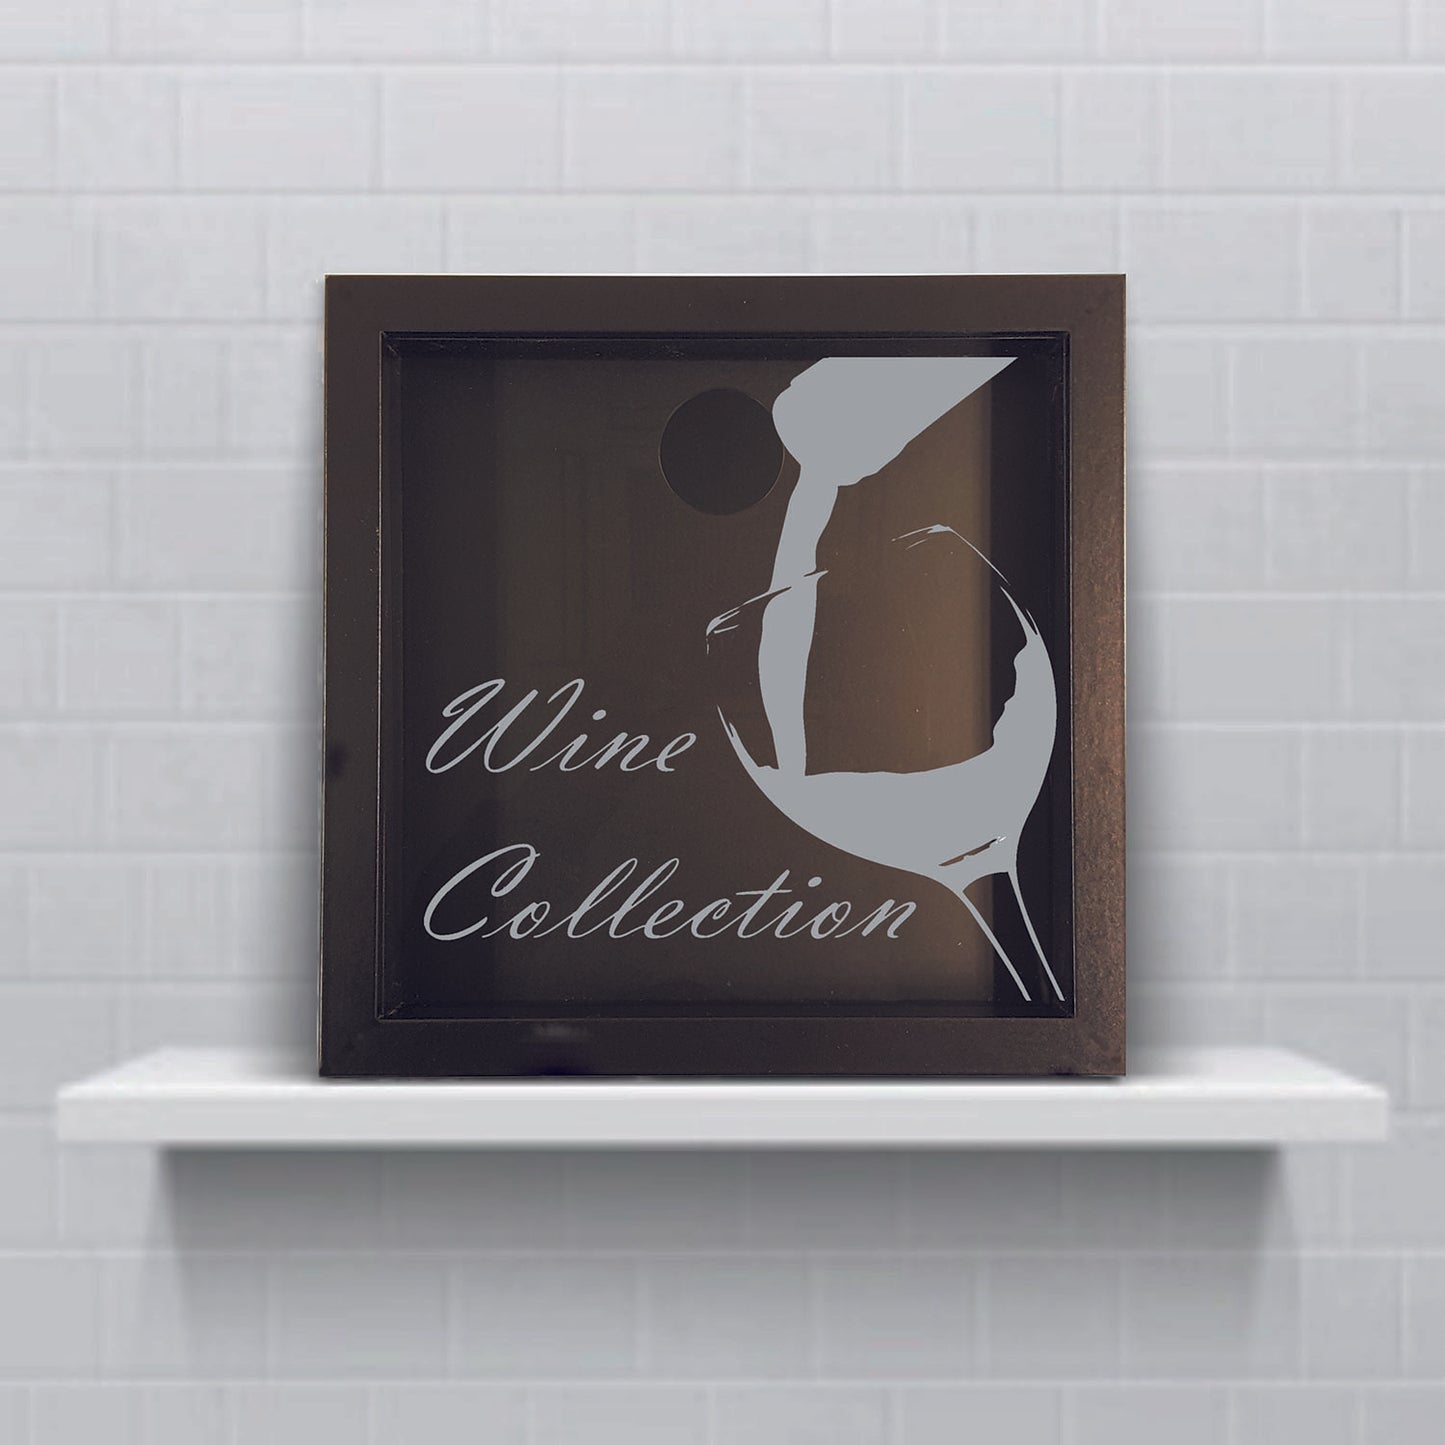 Personalised engraved wine cork collection box